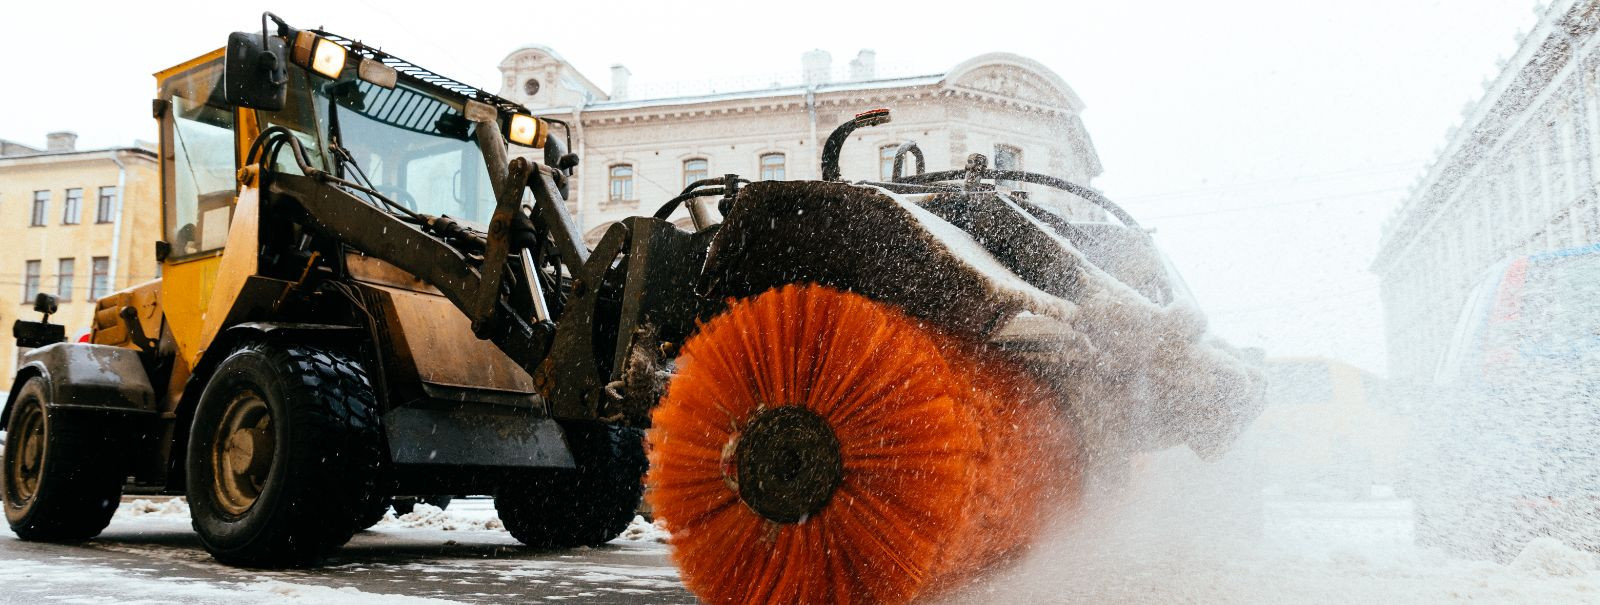 As winter approaches, the inevitability of snowfall becomes a significant concern for property owners and managers. Snow cleaning is not just about maintaining 